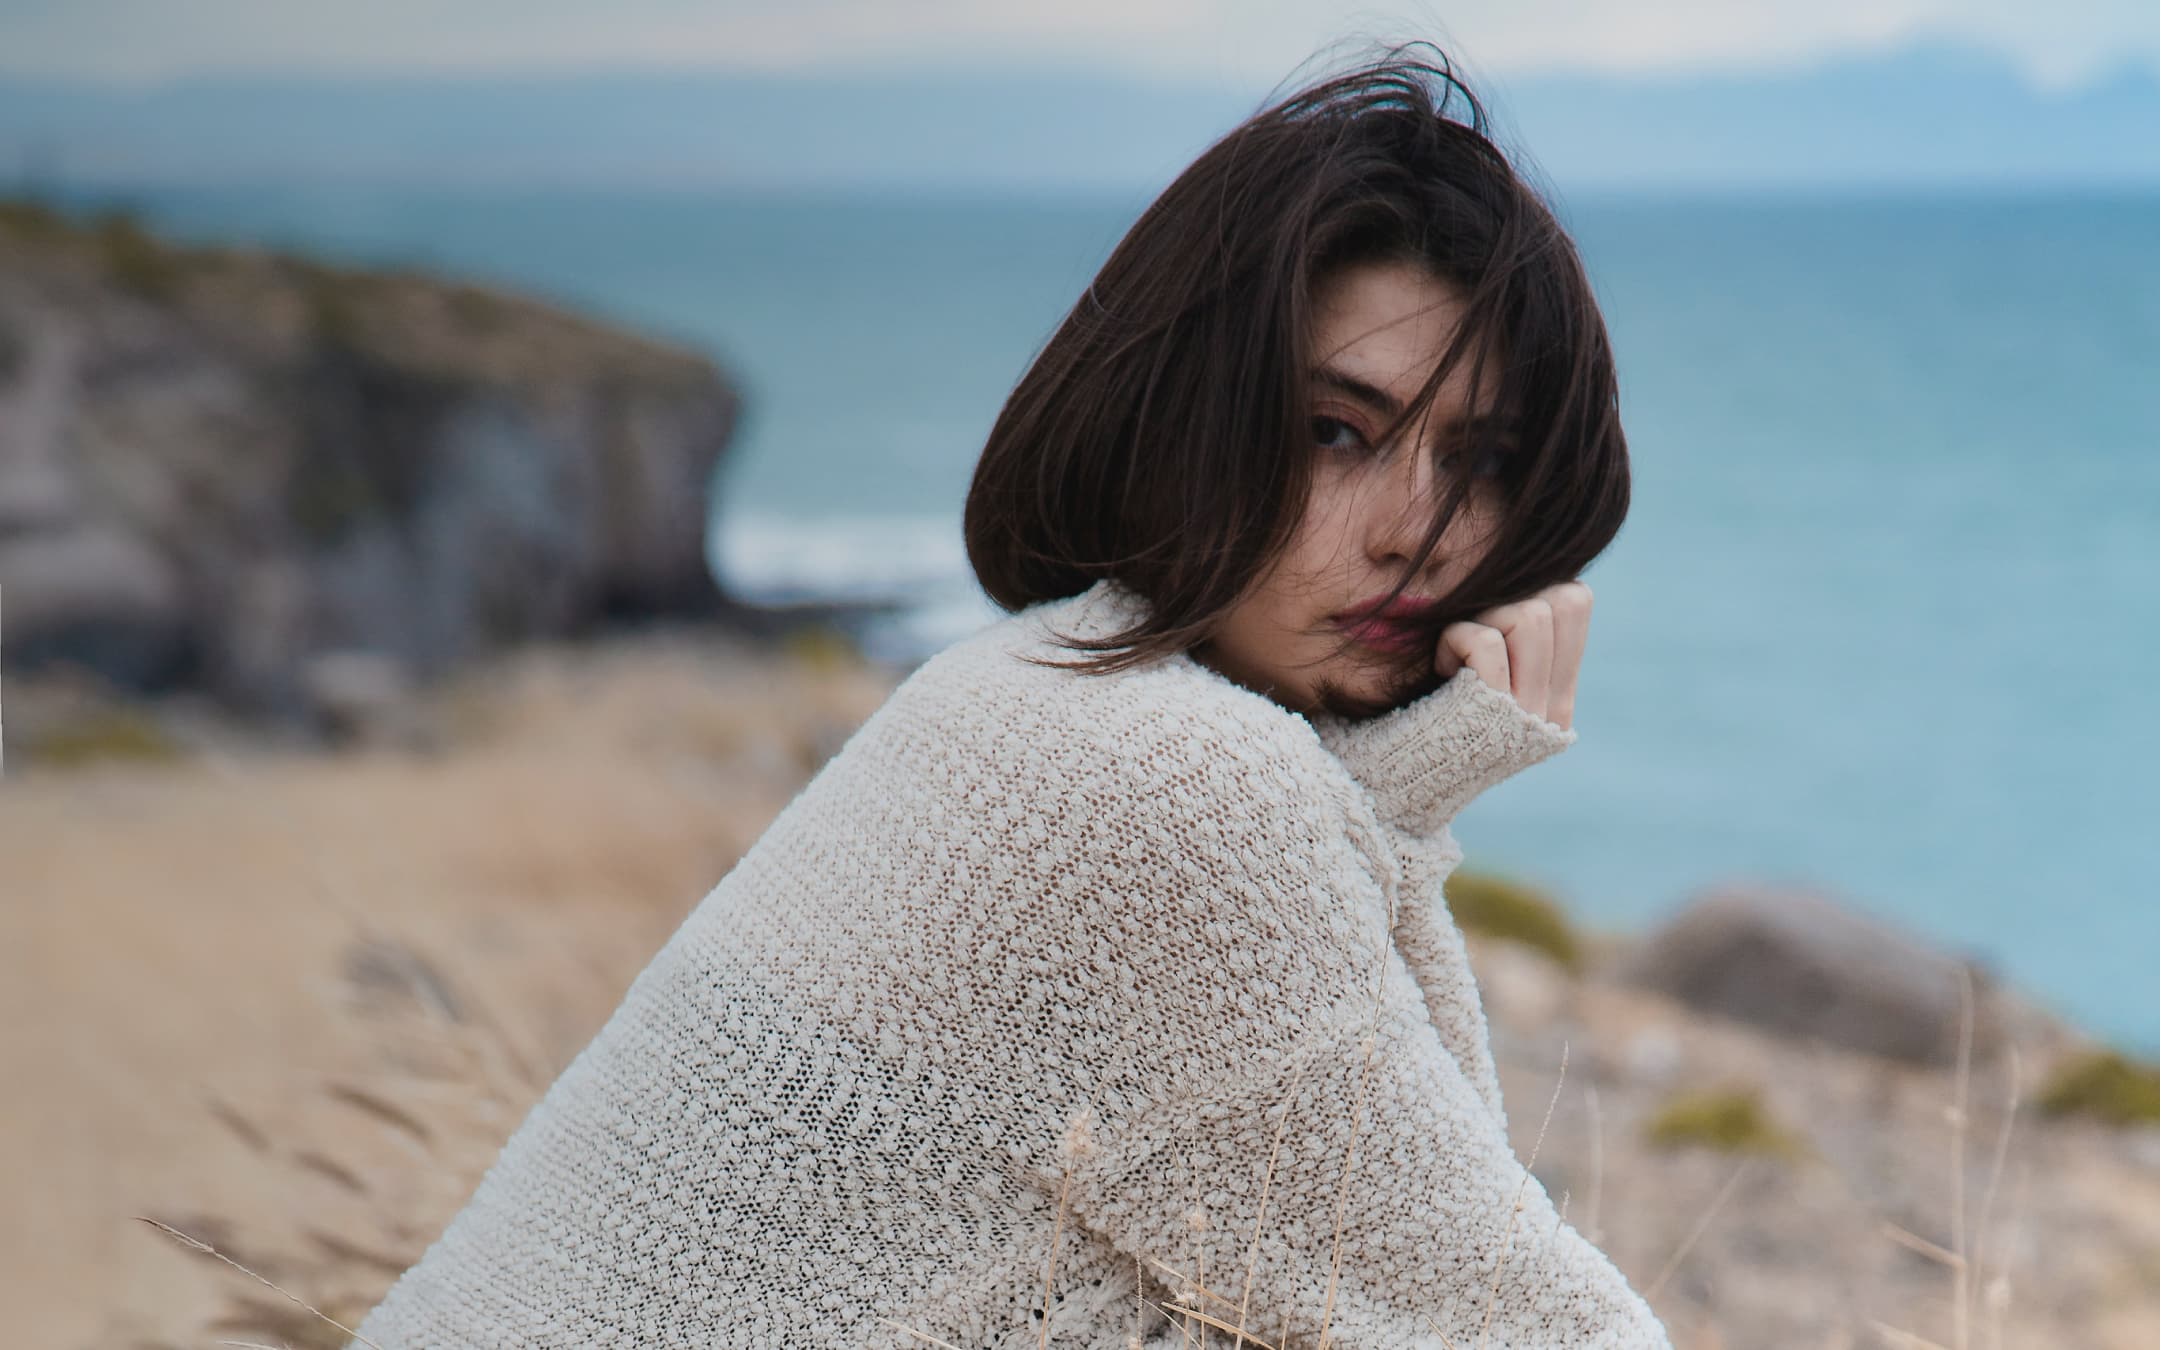 handmade sweaters and vests made of⦁natural yarns for ⦁frailers